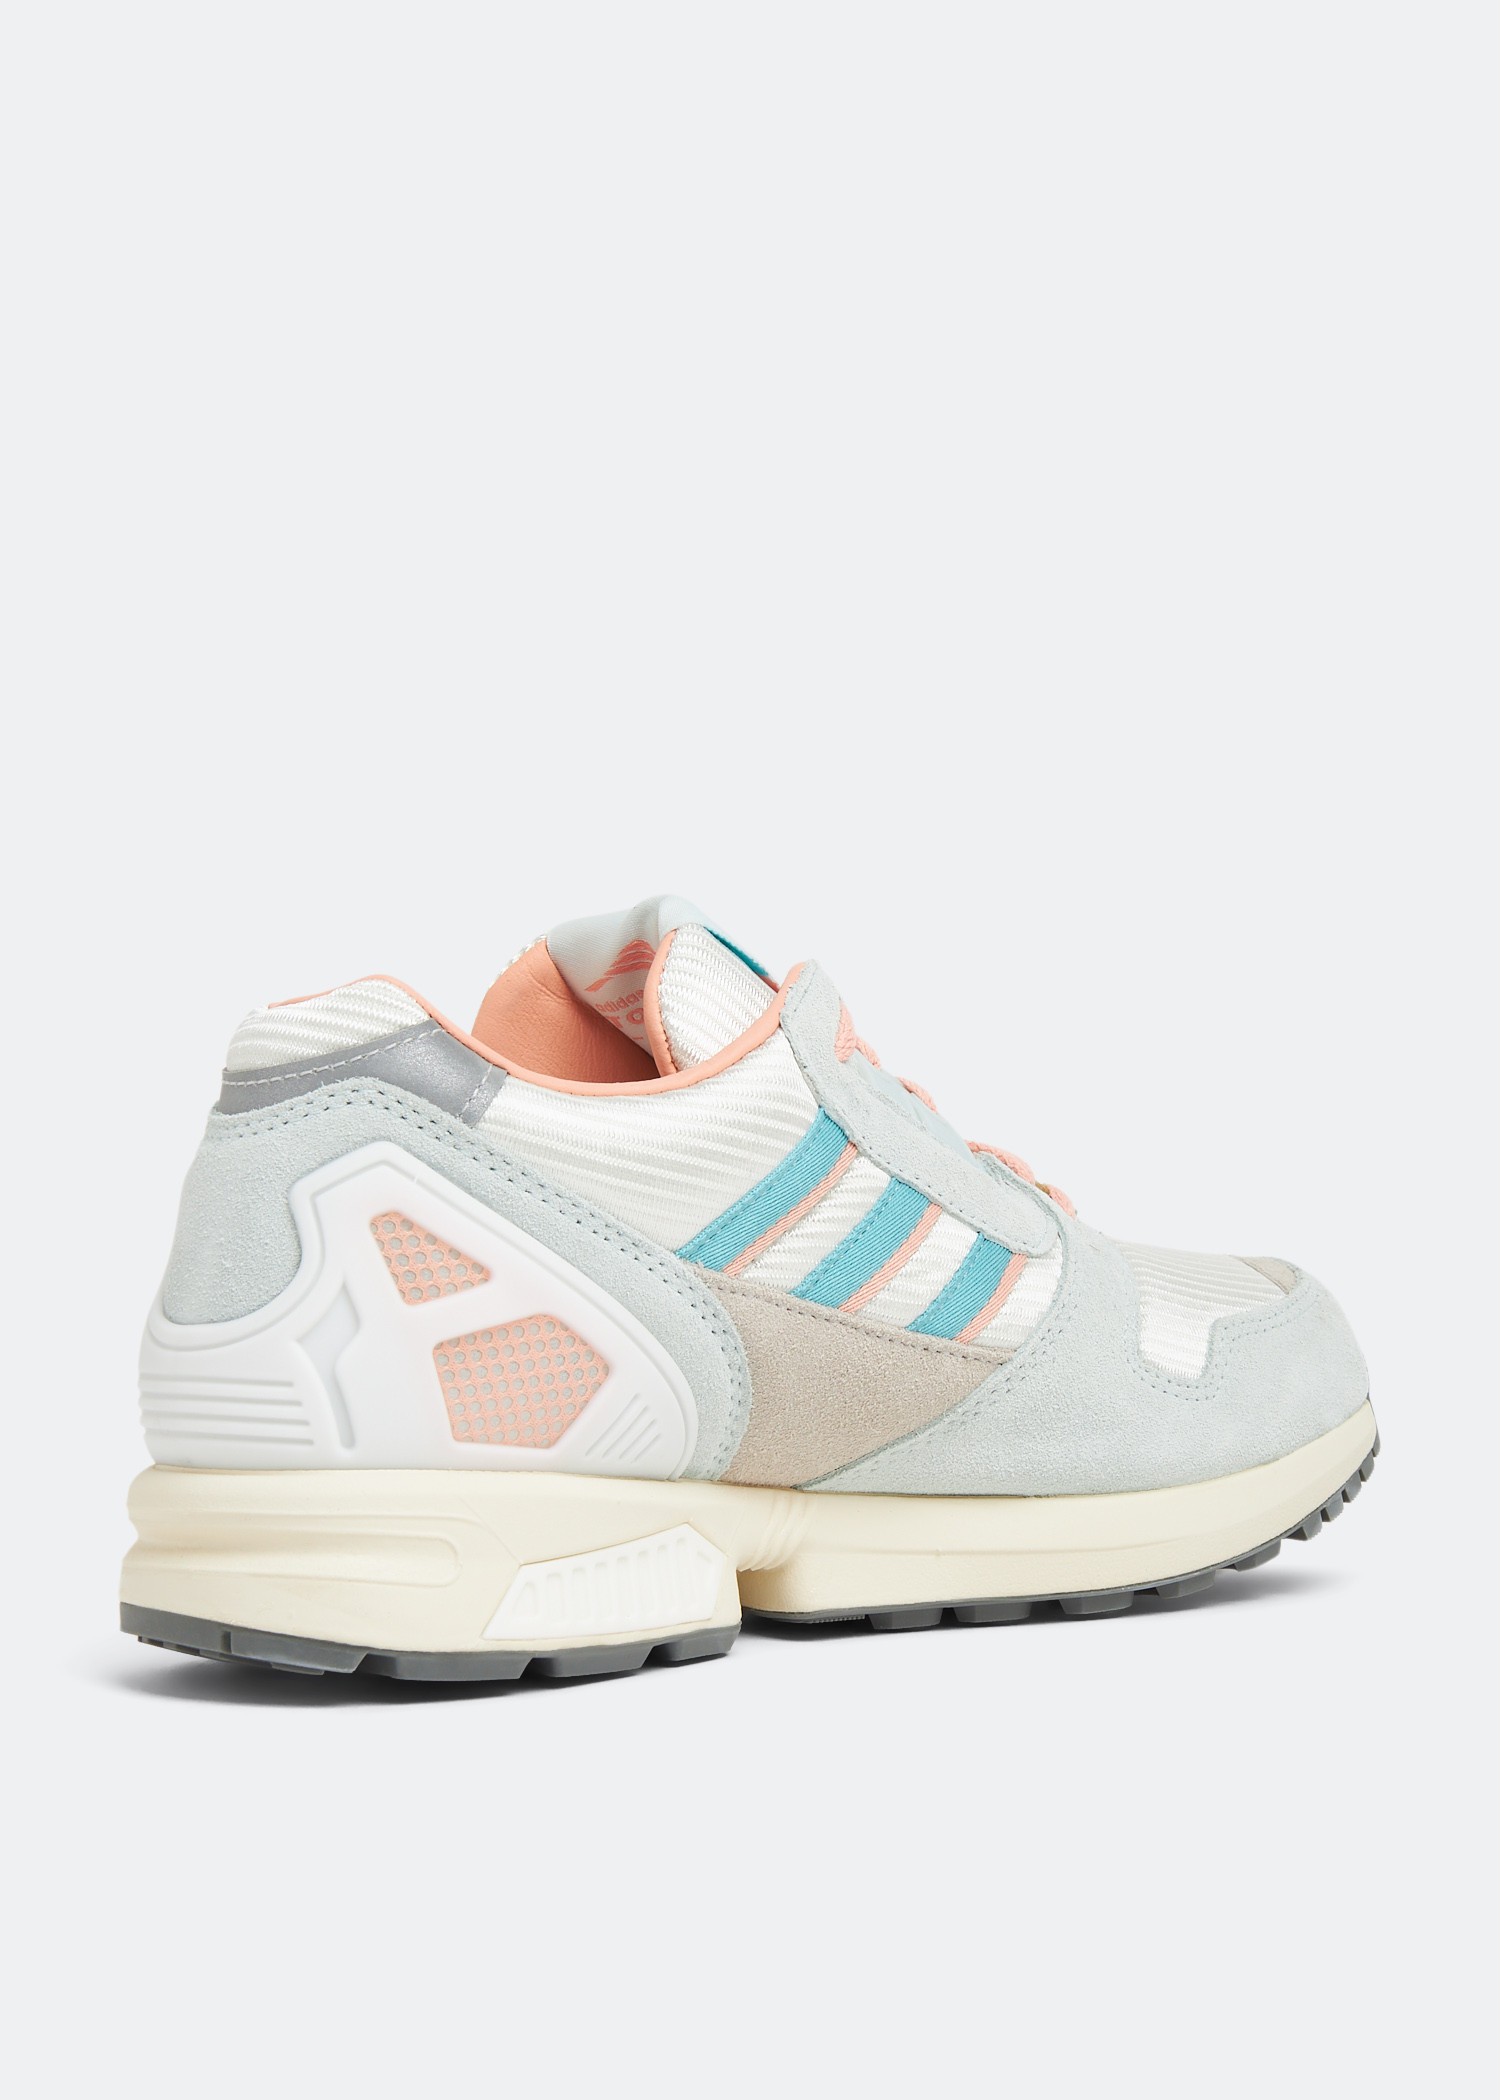 Adidas ZX 8000 sneakers for Women - Blue in KSA | Level Shoes